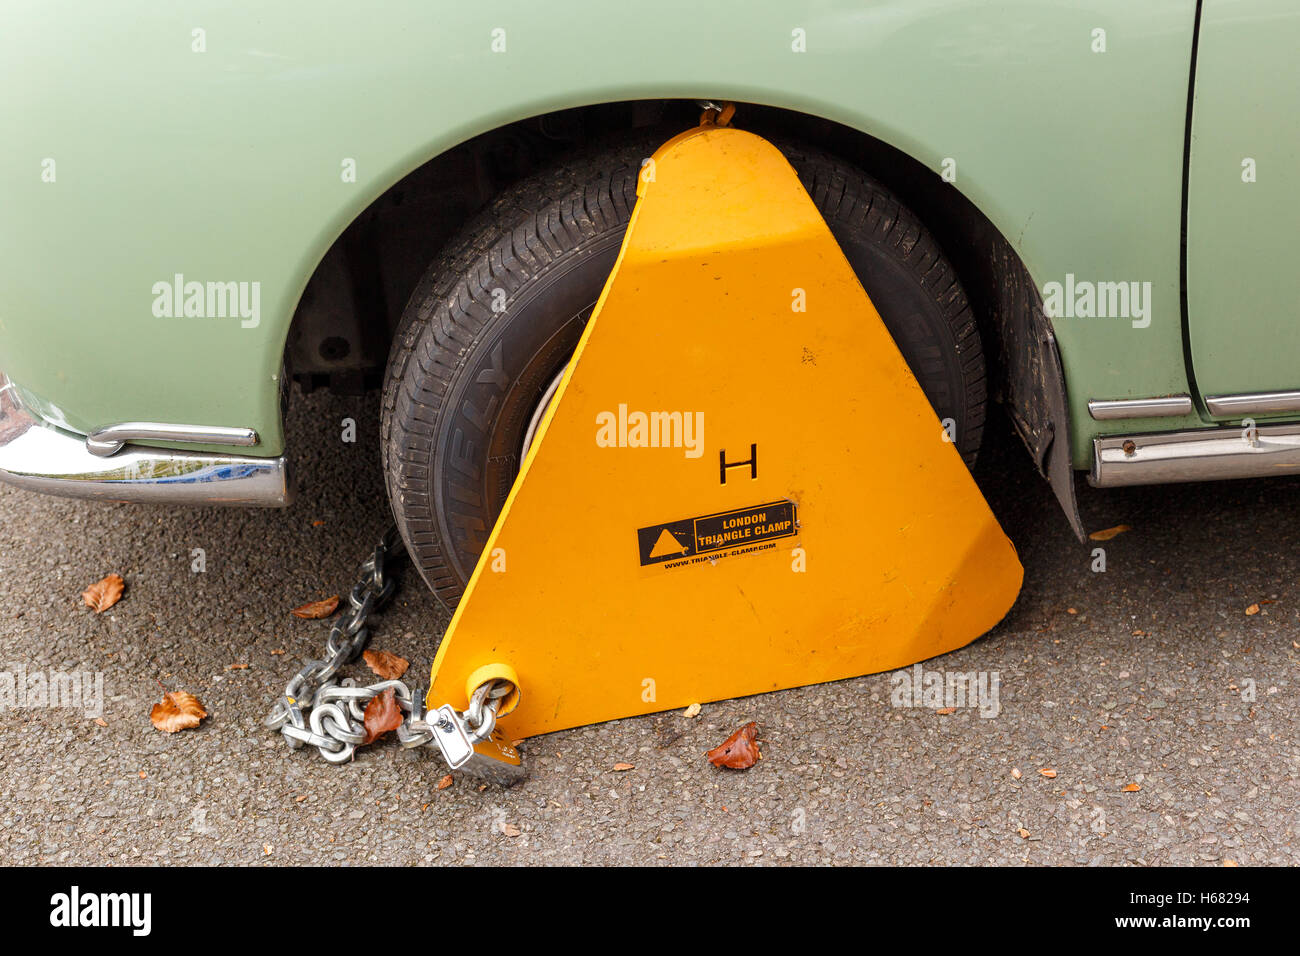 Nissan Figaro classic car with yellow triangle wheel parking clamp attached. Stock Photo